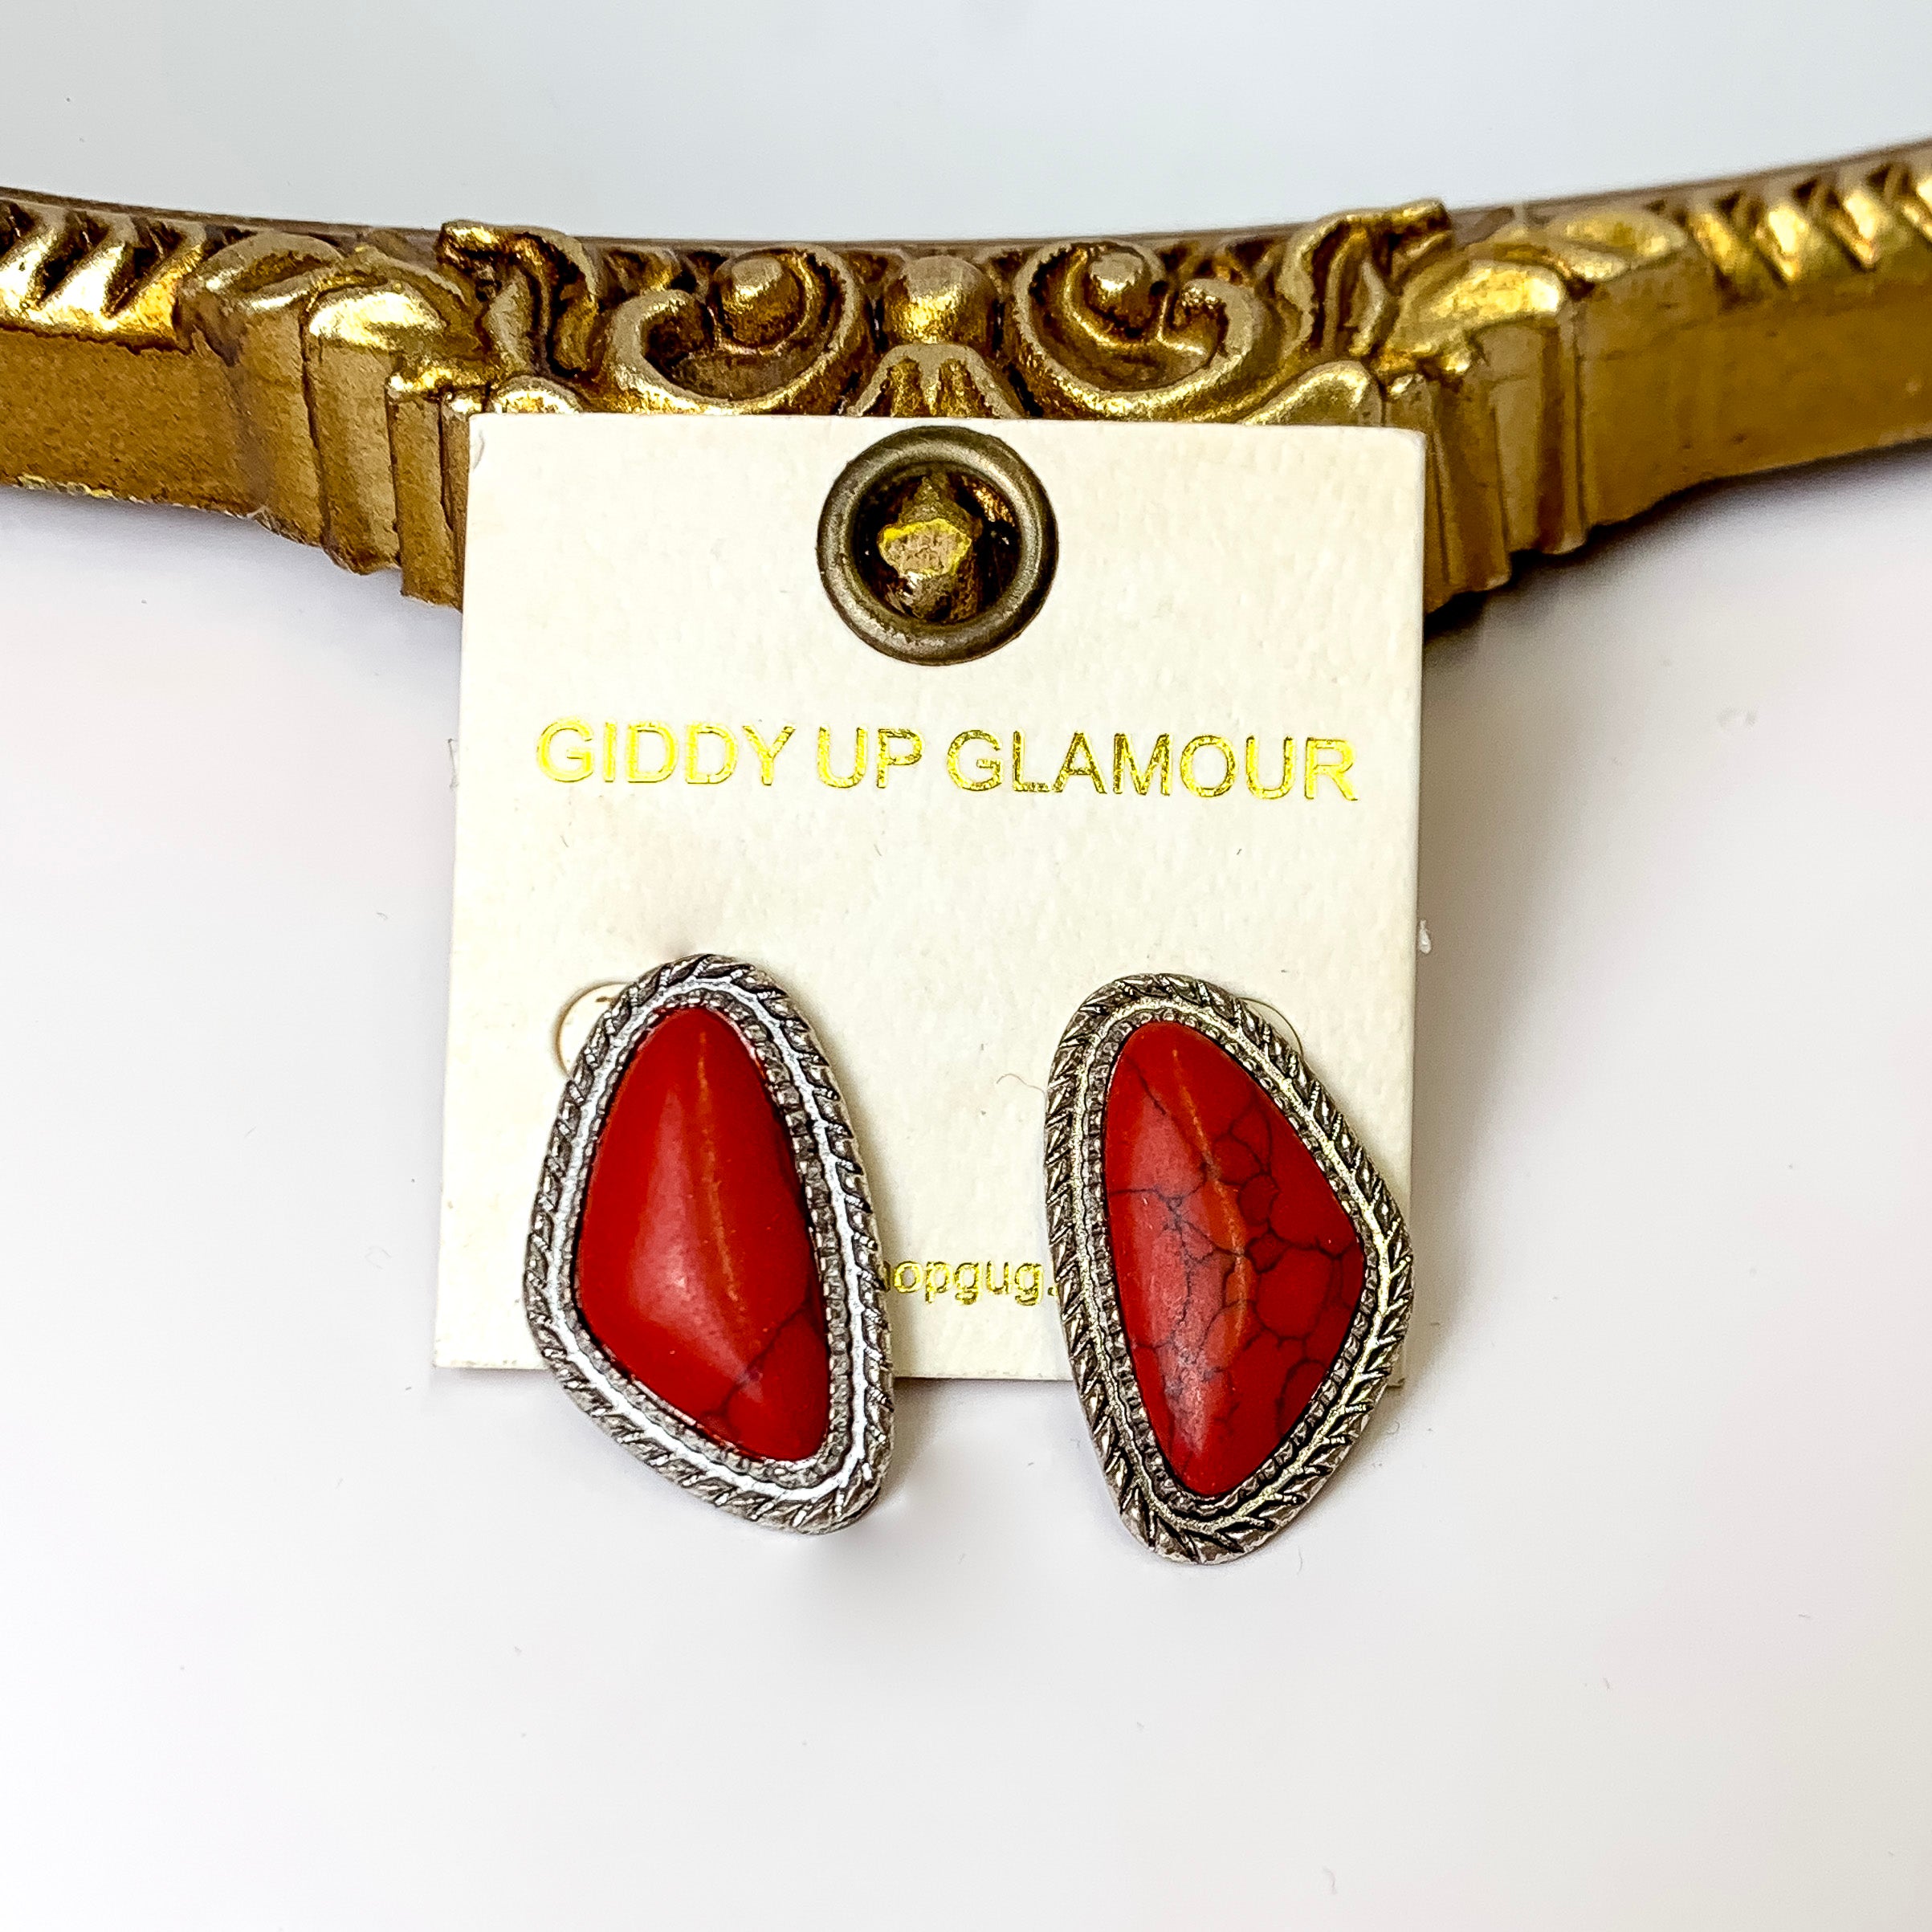 Silver Tone Irregular Shaped Faux Stone Post Earrings in Dark Red - Giddy Up Glamour Boutique